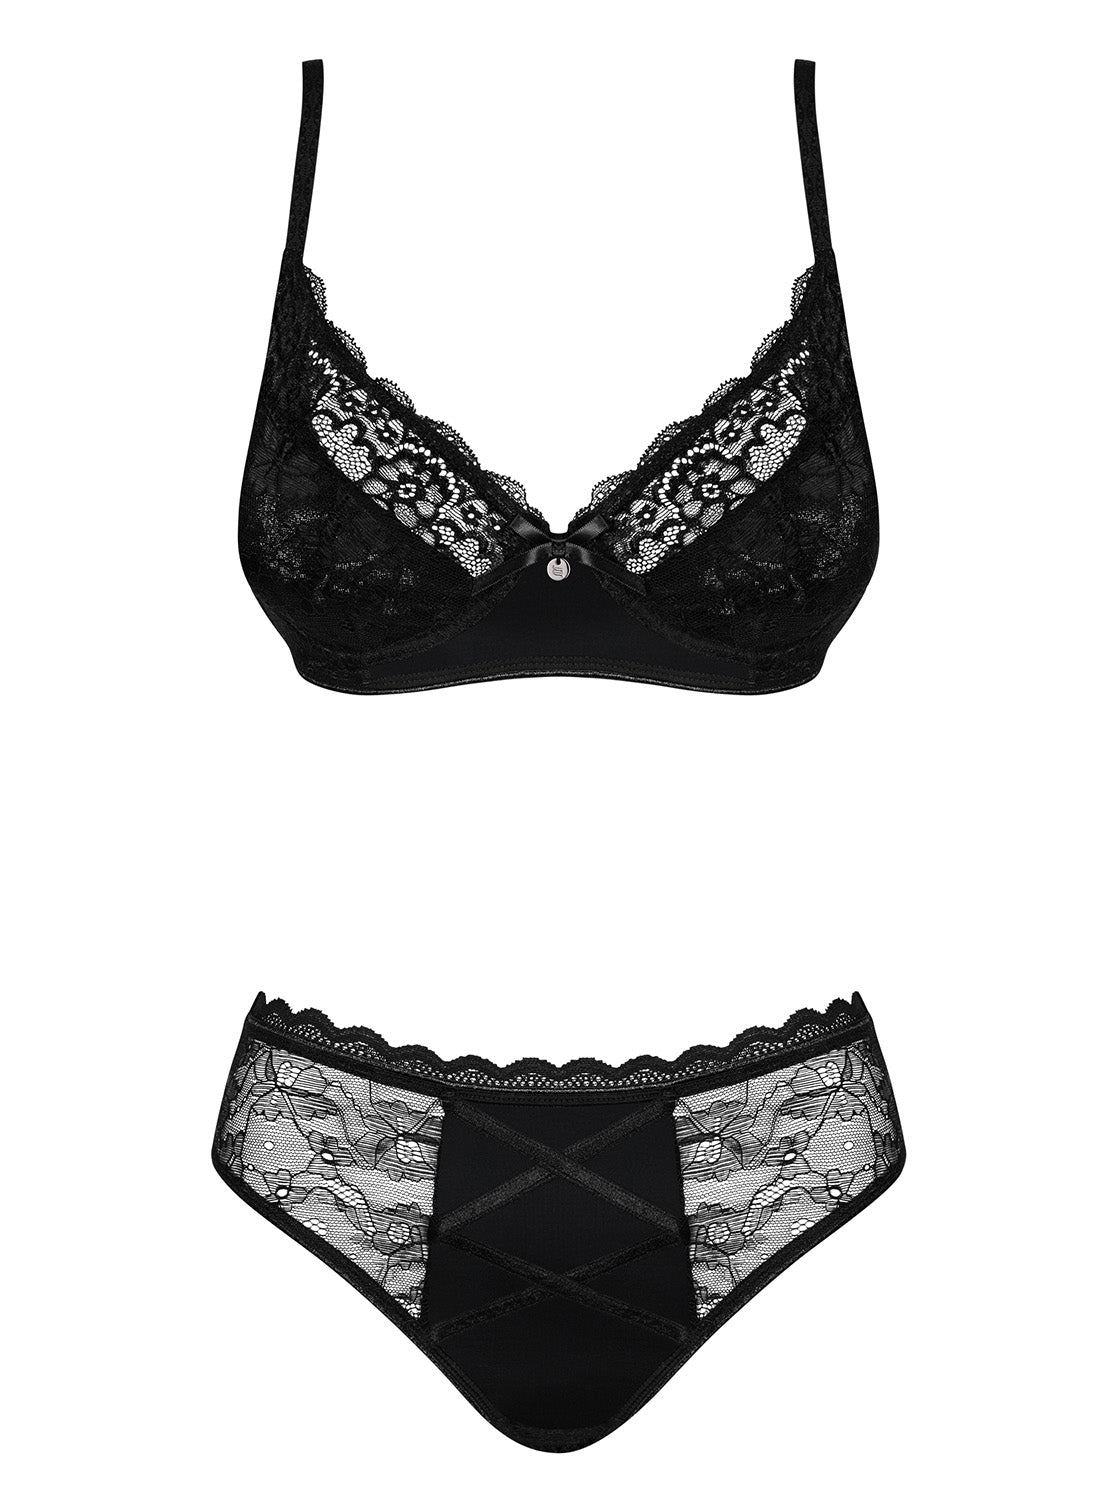 Laurise Dreamy set in a hot combination of transparent lace and opaque material